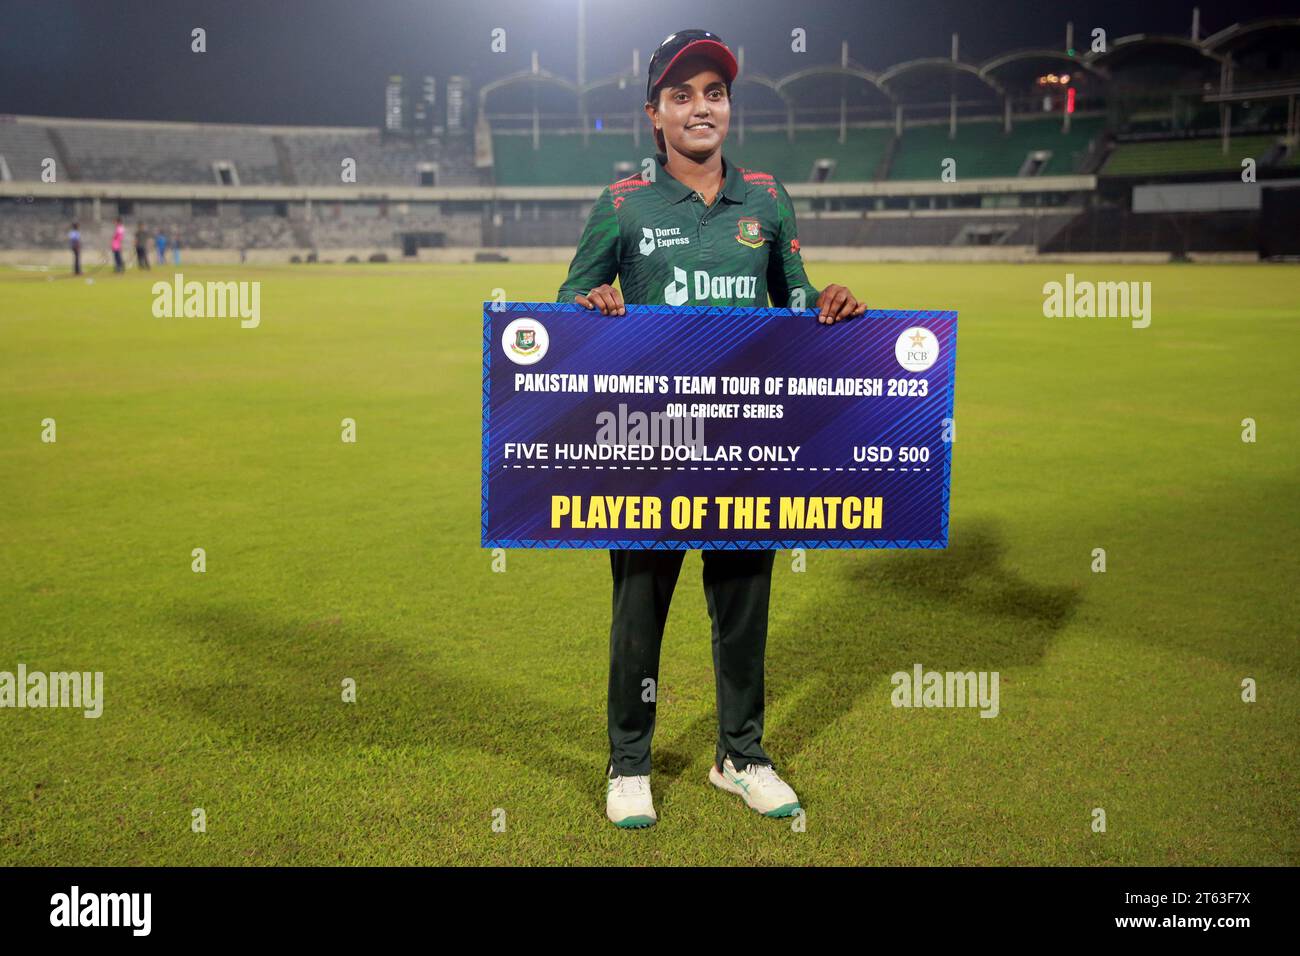 Captain Nigar Sultana Joty become man of the match as Bangladesh women's cricket team clinched the second ODI of the three-match series against Pakist Stock Photo